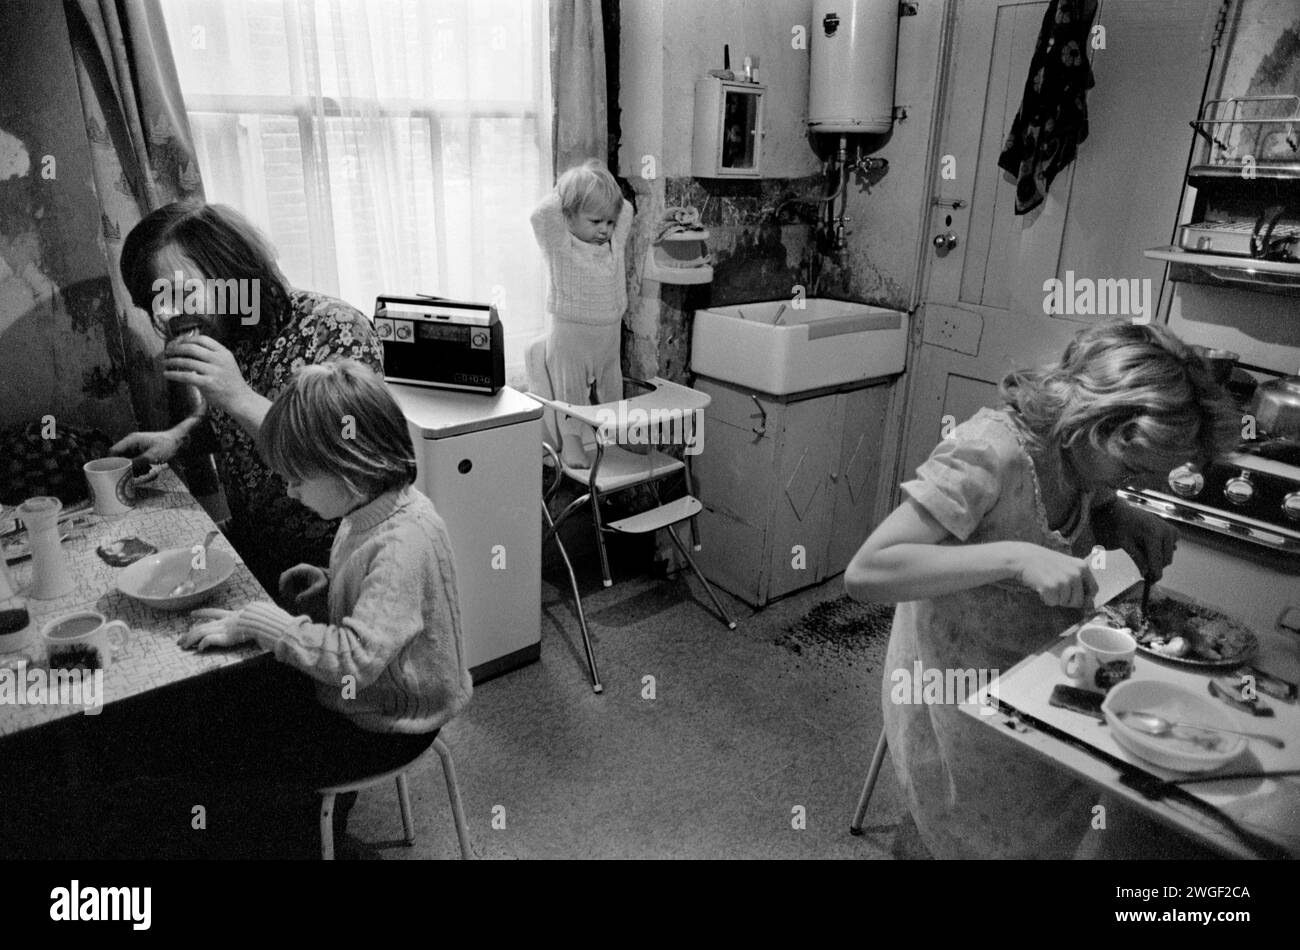 Working class family 1970s UK, at home Fulham London 1972. This is their kitchen. They did not have their own bathroom which was shared with other families in the house. The butler sink is used for face body washing in the morning. The kitchen table is not big enough for everyone to sit around. Mother uses the small pull down 'table' when they all eat together. Baby in high chair.  HOMER SYKES Stock Photo